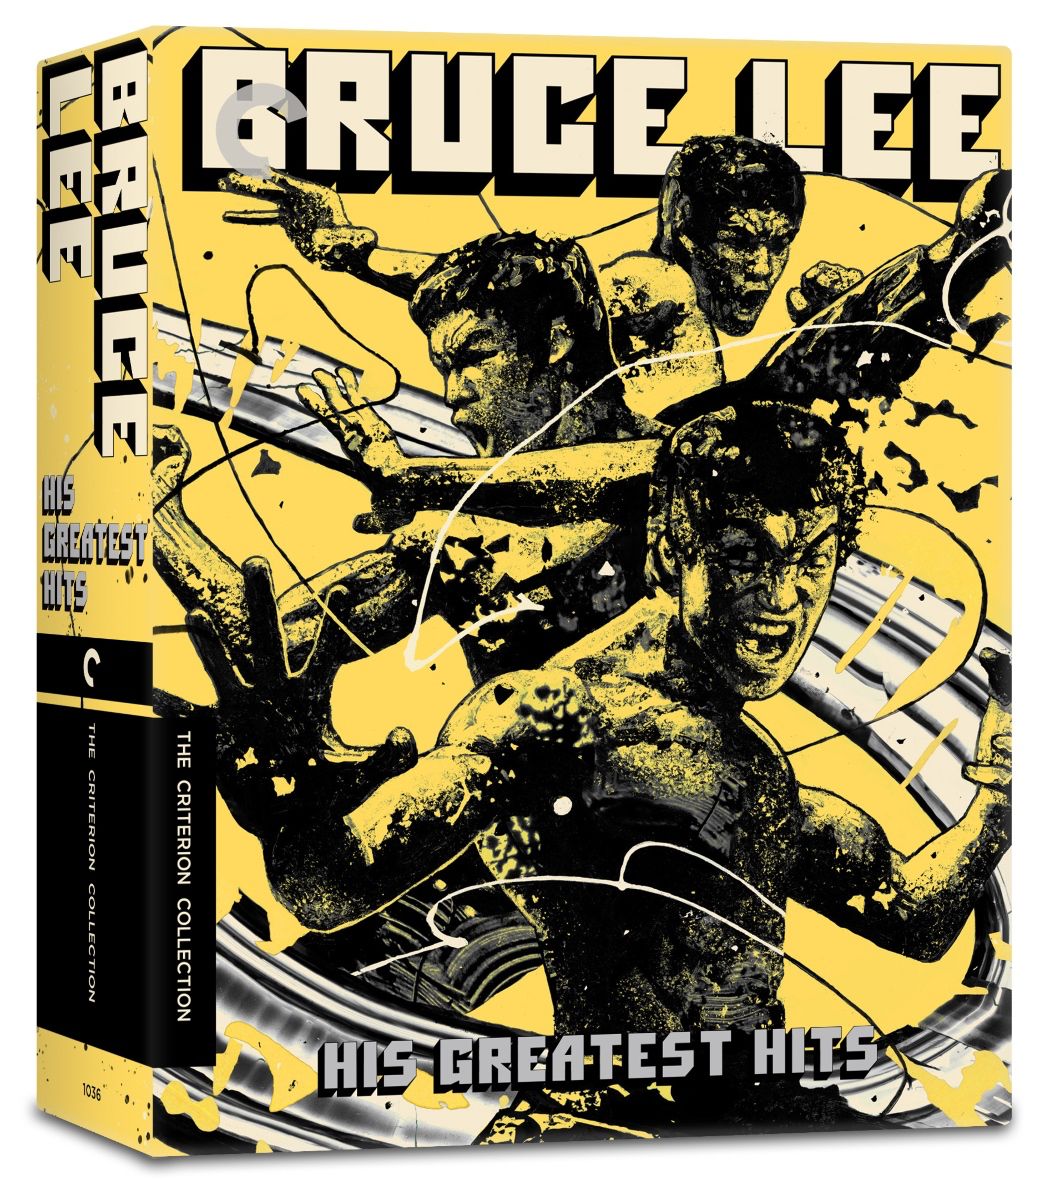 Bruce Lee Greatest Hits Collection Criterion Image #7